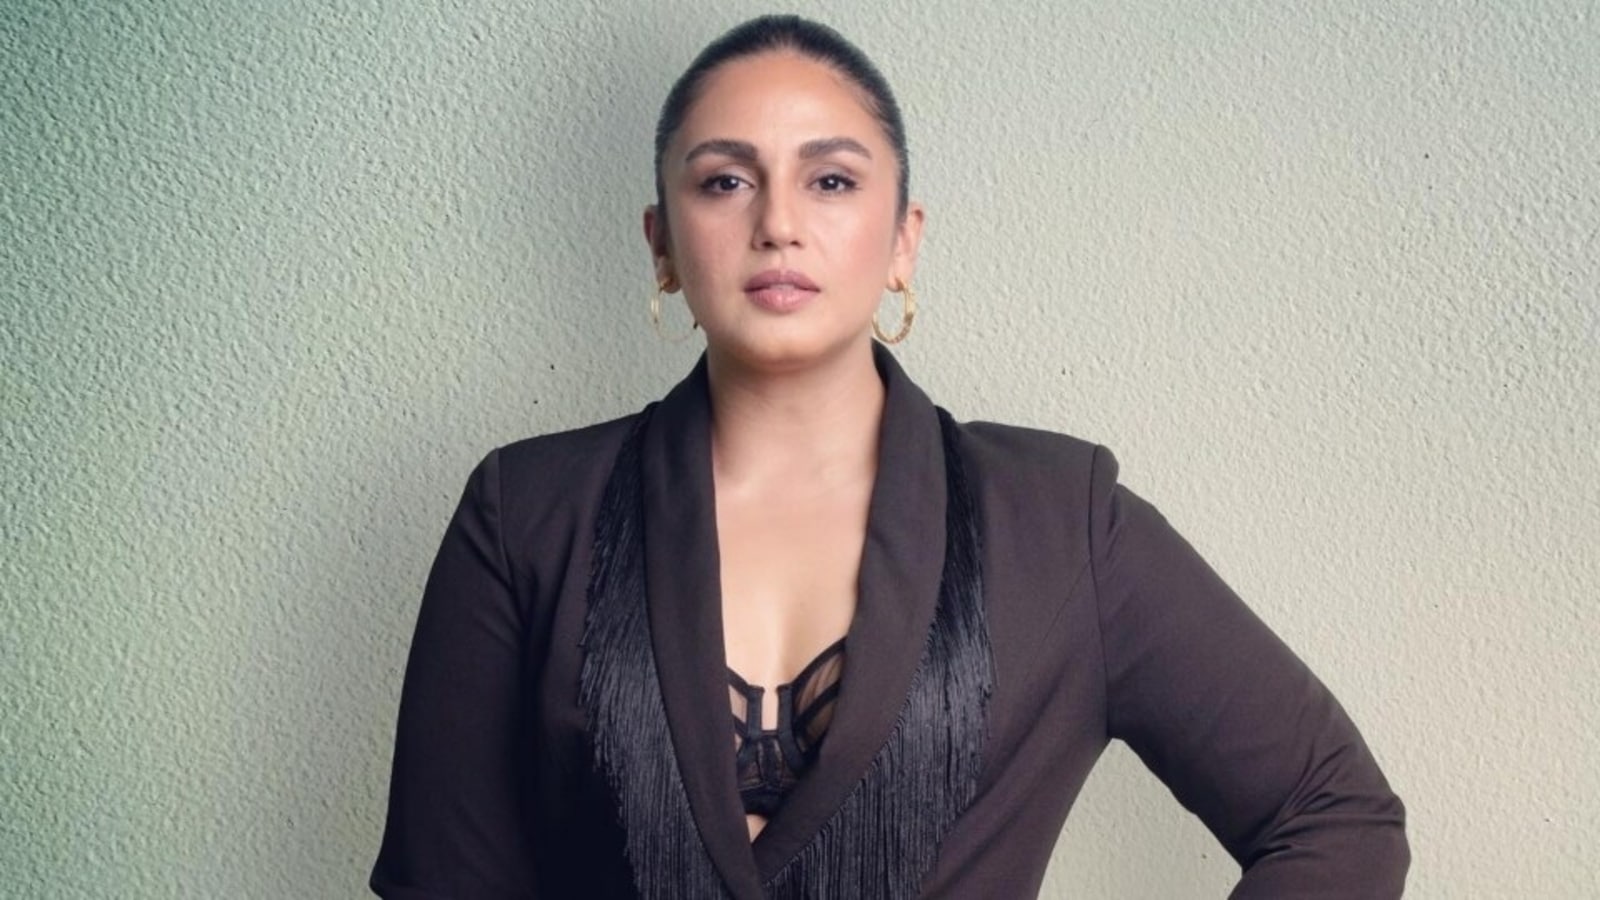 Huma Qureshi is the fashion icon we need in sheer bralette and mini blazer  dress for new pics: Check it out here | Fashion Trends - Hindustan Times